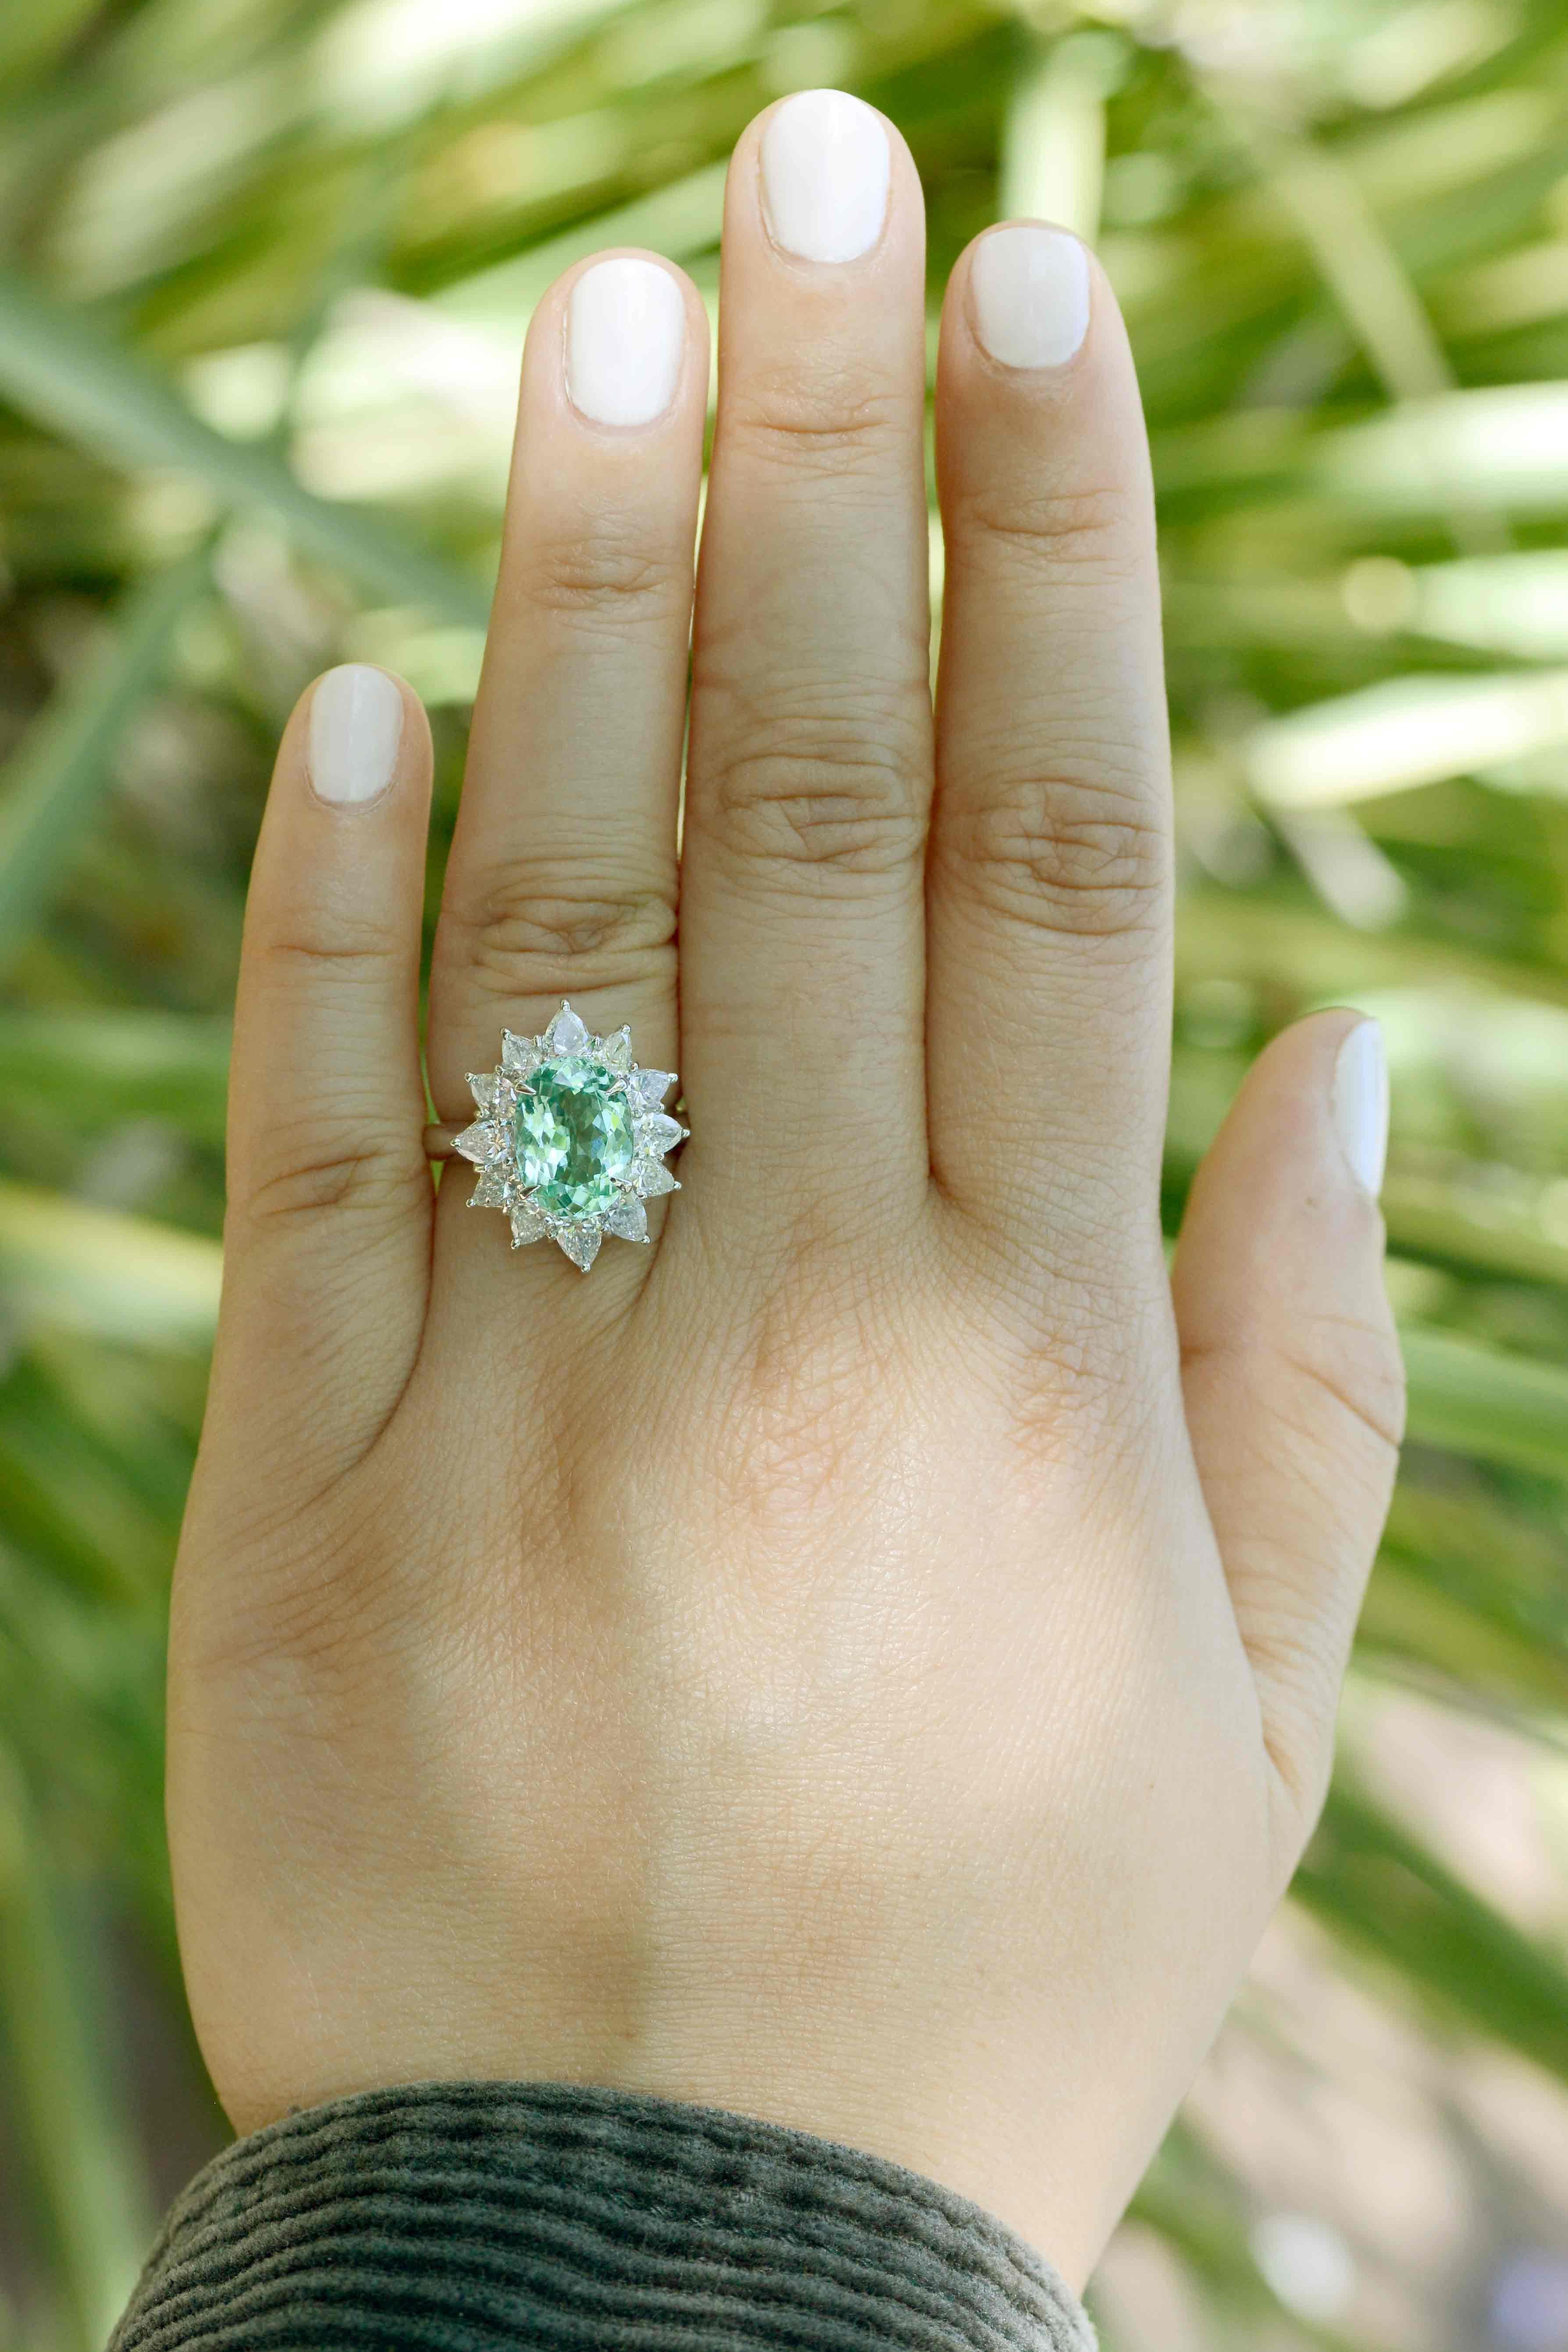 A most breathtaking, refreshing, large Paraiba tourmaline and diamond engagement ring that oozes royalty. The rare, natural gemstone of an impressive 3.35 carats has that distinctive color of the Mediterranean Sea that really pops. GIA certified as